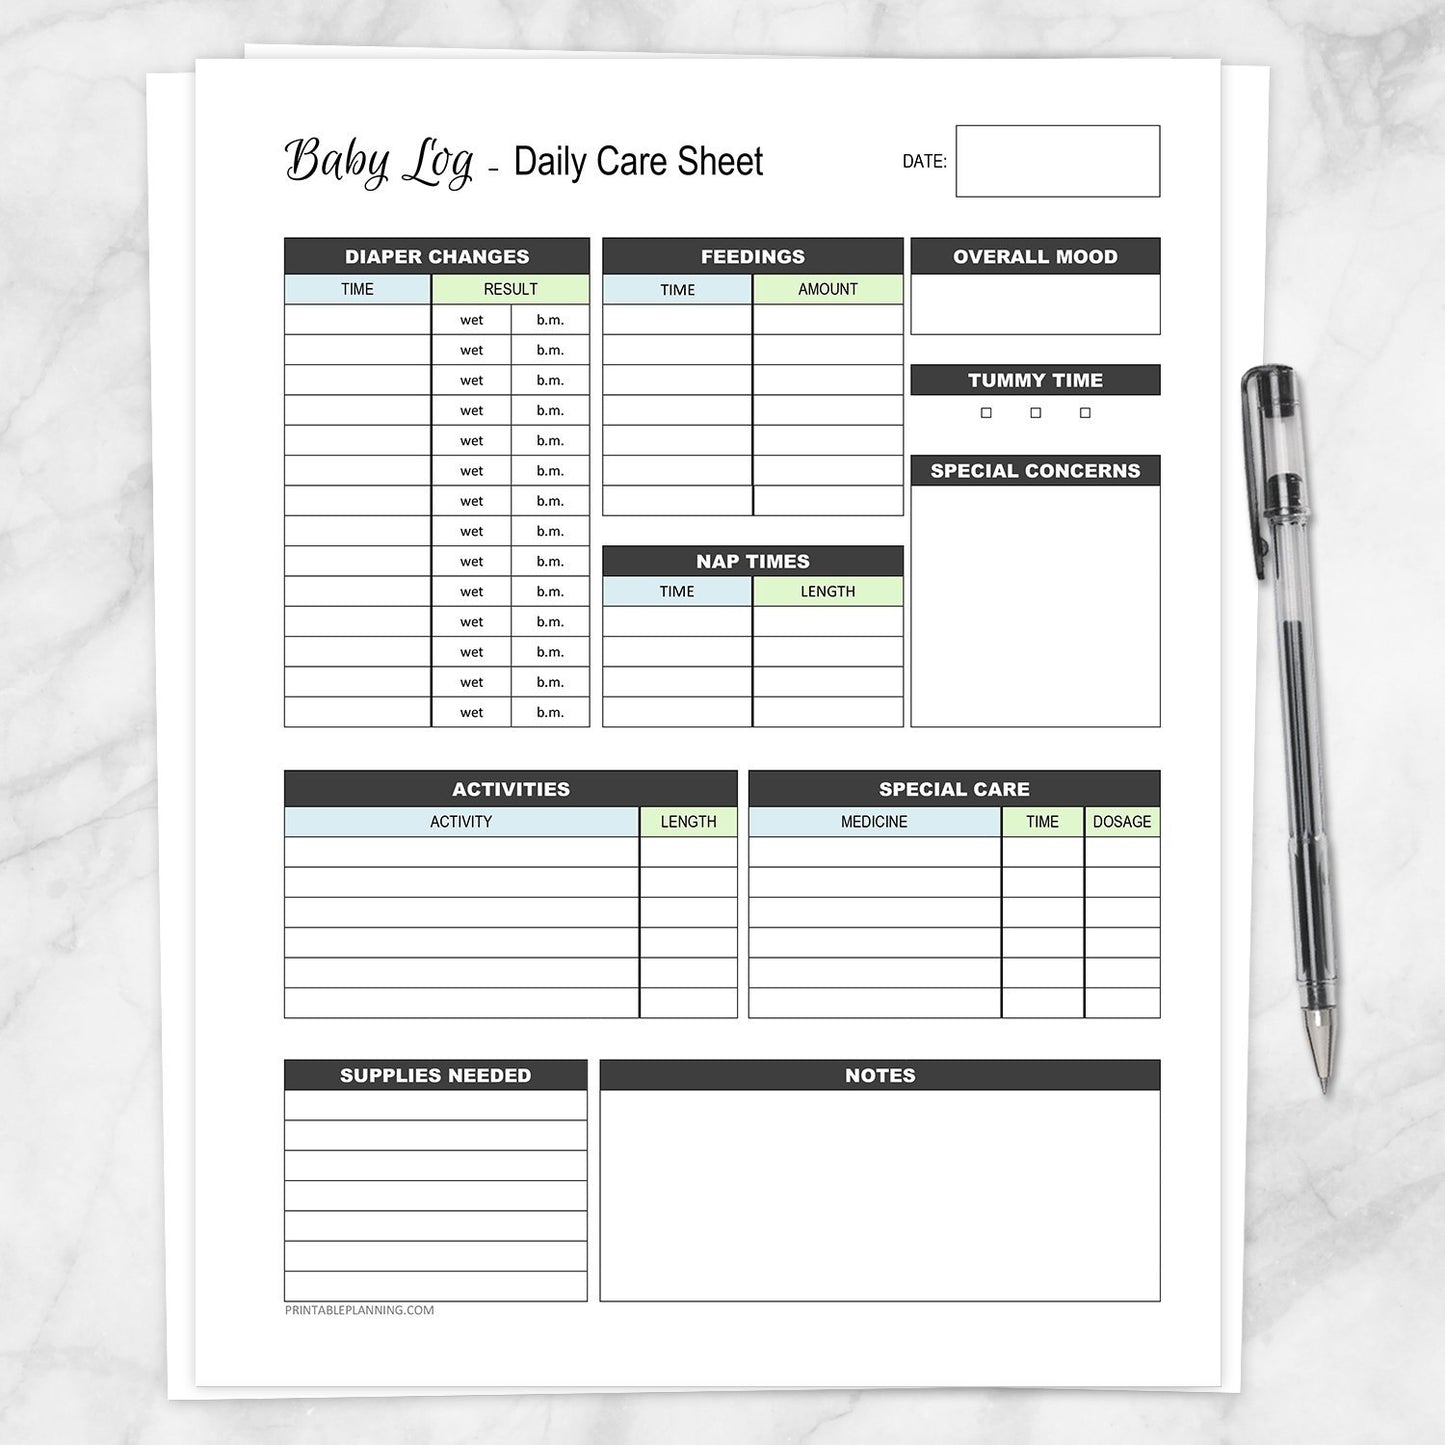 Printable Baby Log - Daily Infant Care Sheet - Blue and Green at Printable Planning